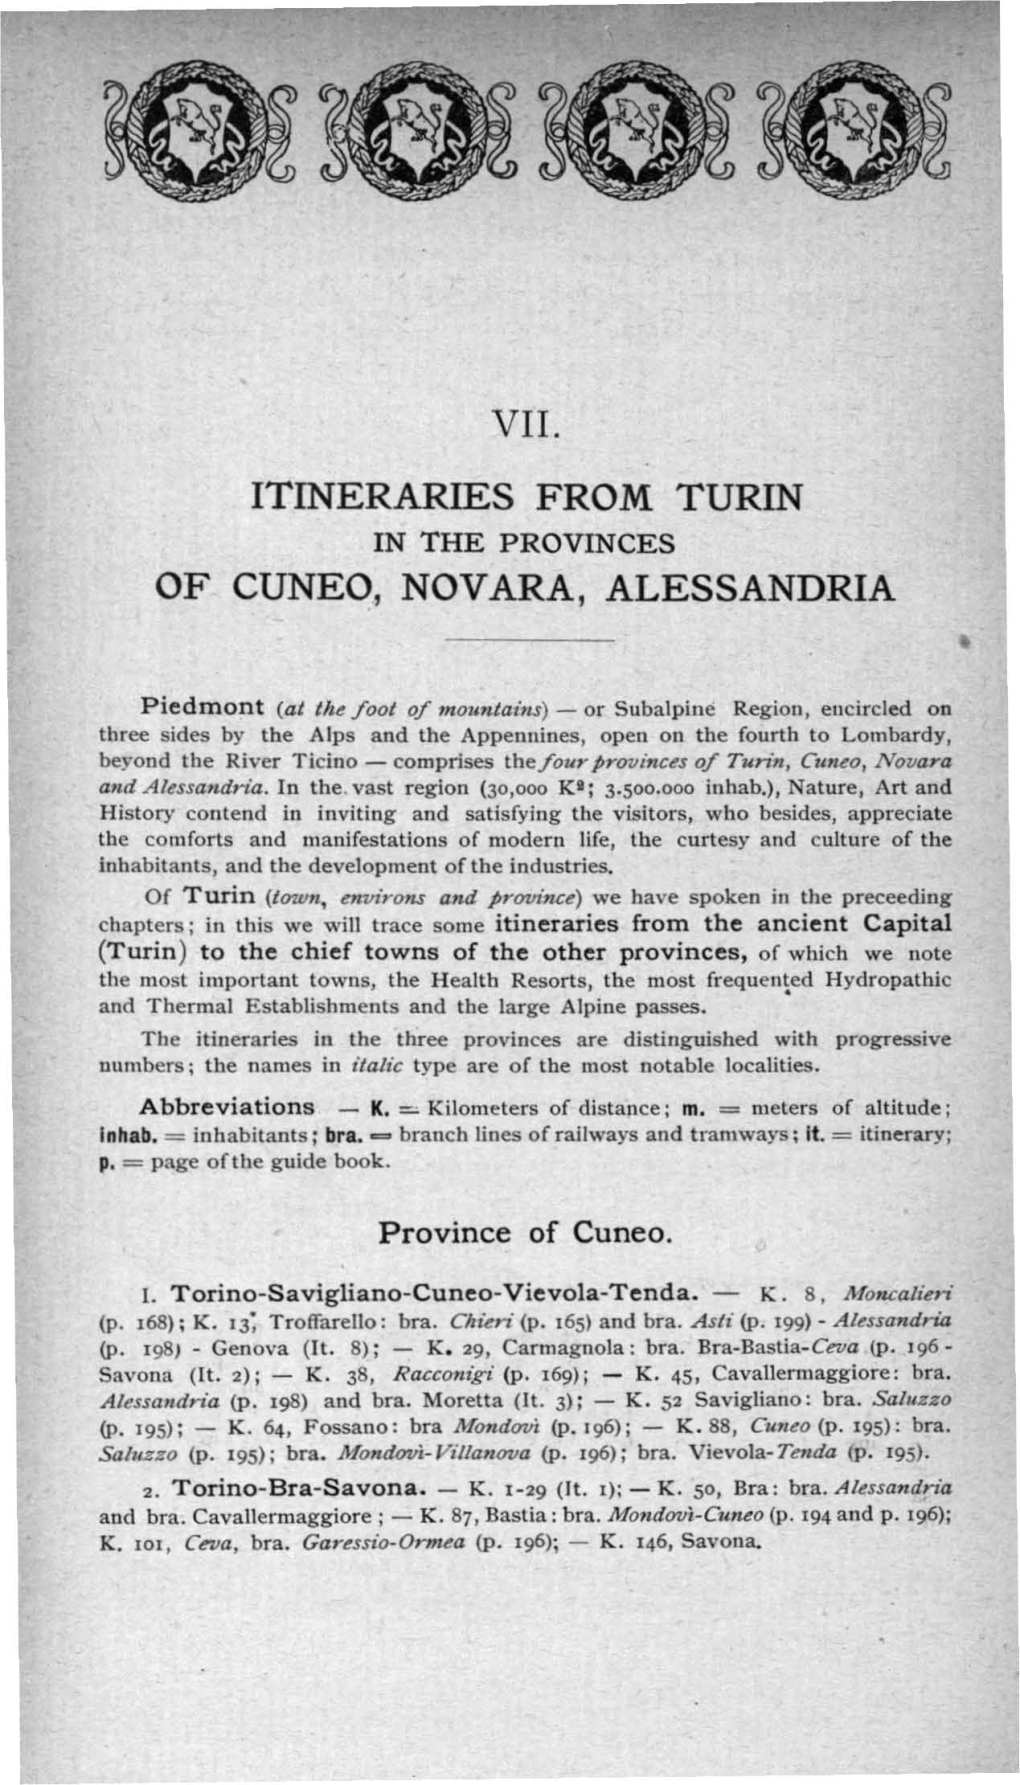 Vii. Itineraries from Turin of Cuneo, Novara, Alessandria